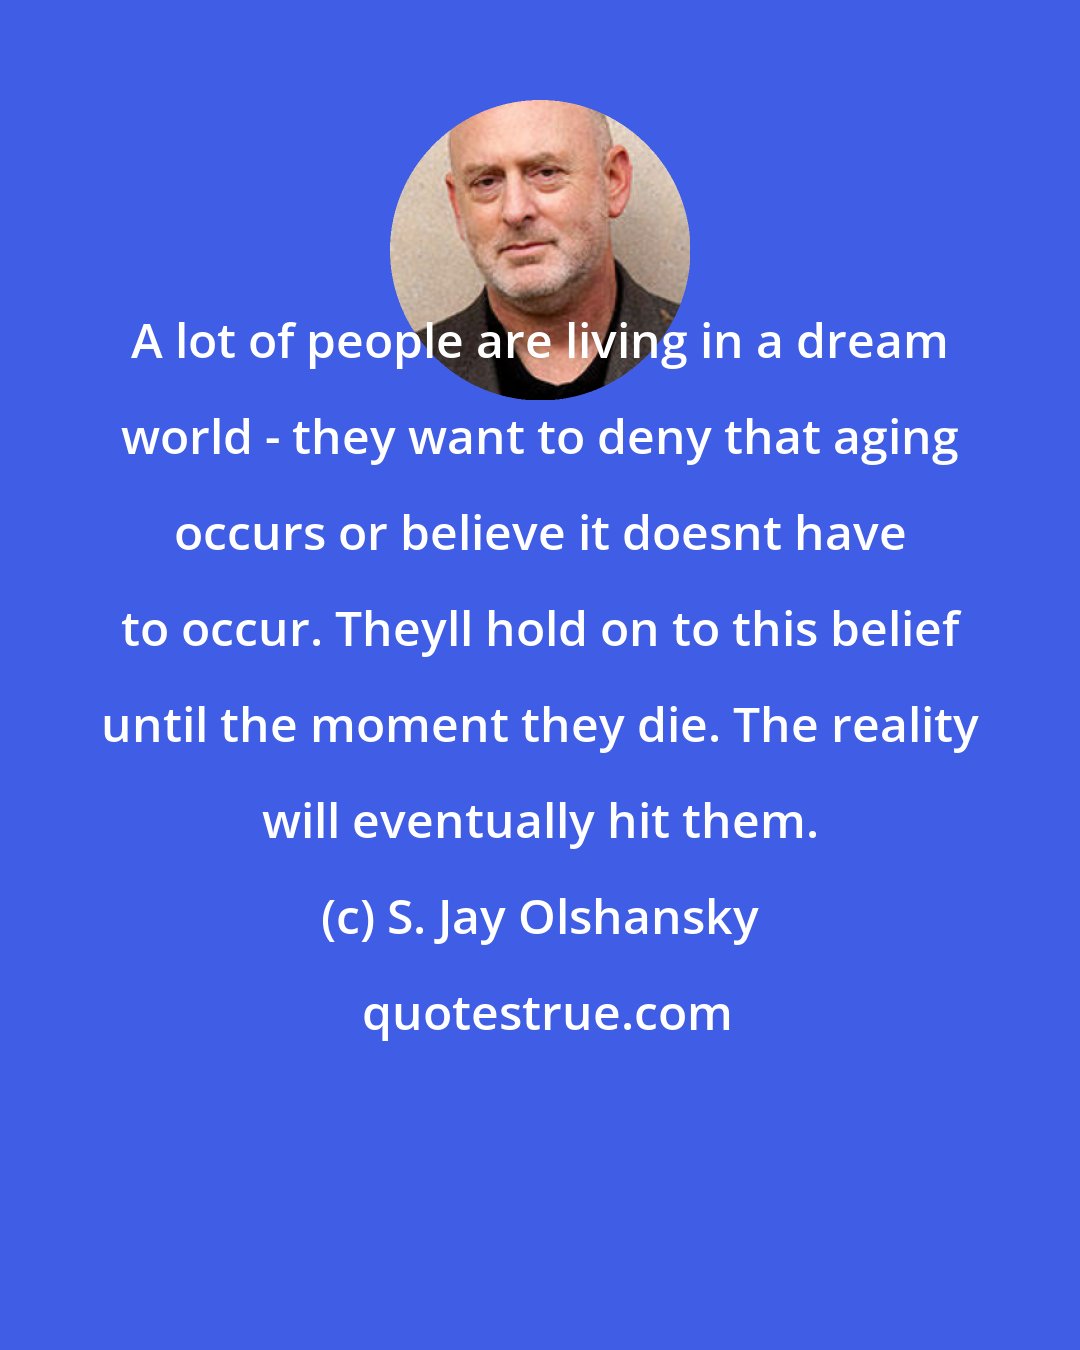 S. Jay Olshansky: A lot of people are living in a dream world - they want to deny that aging occurs or believe it doesnt have to occur. Theyll hold on to this belief until the moment they die. The reality will eventually hit them.